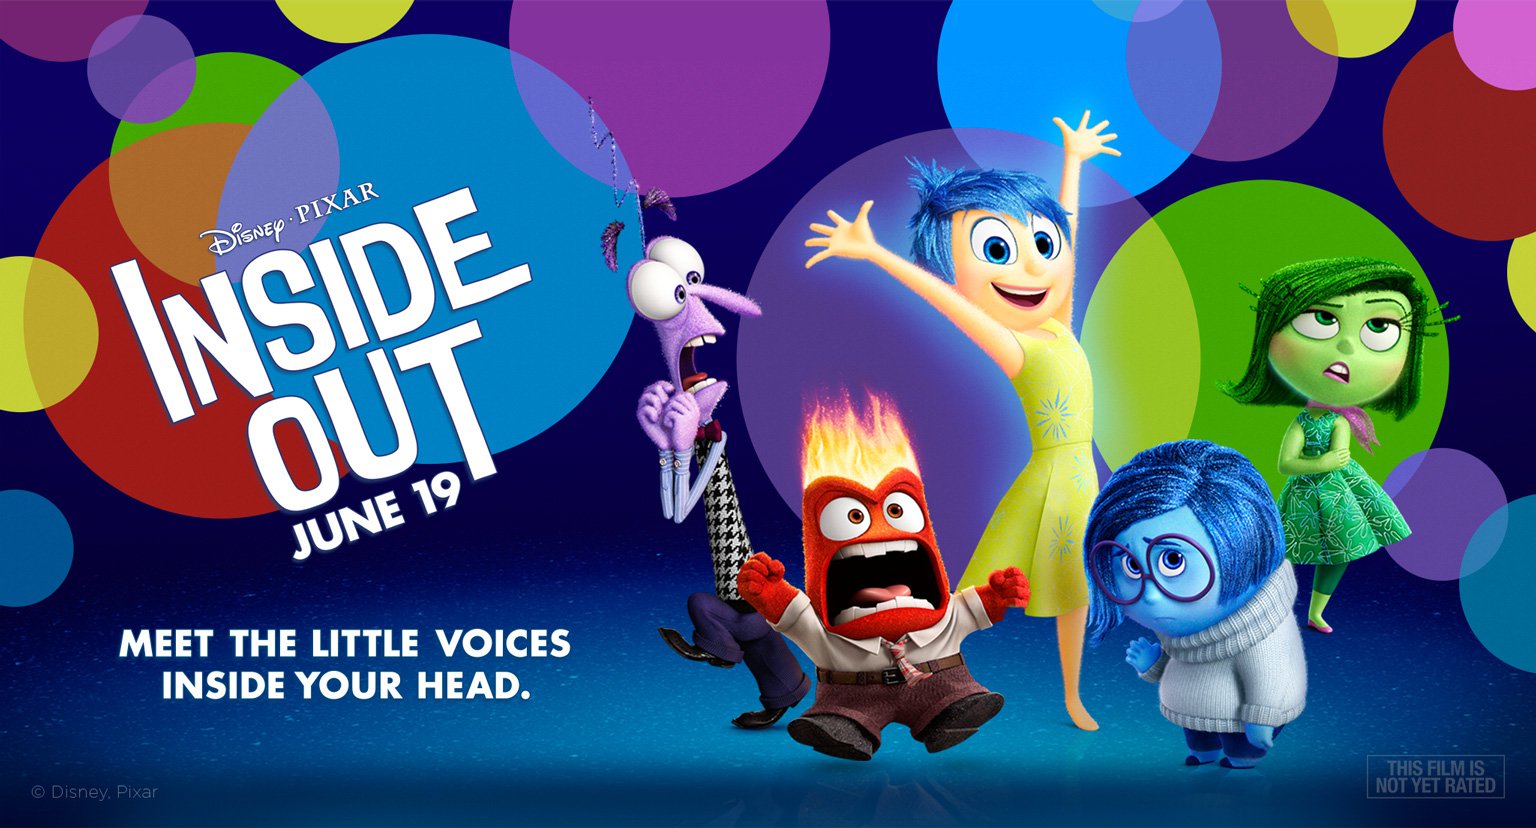 Inside out rotoscopers contest